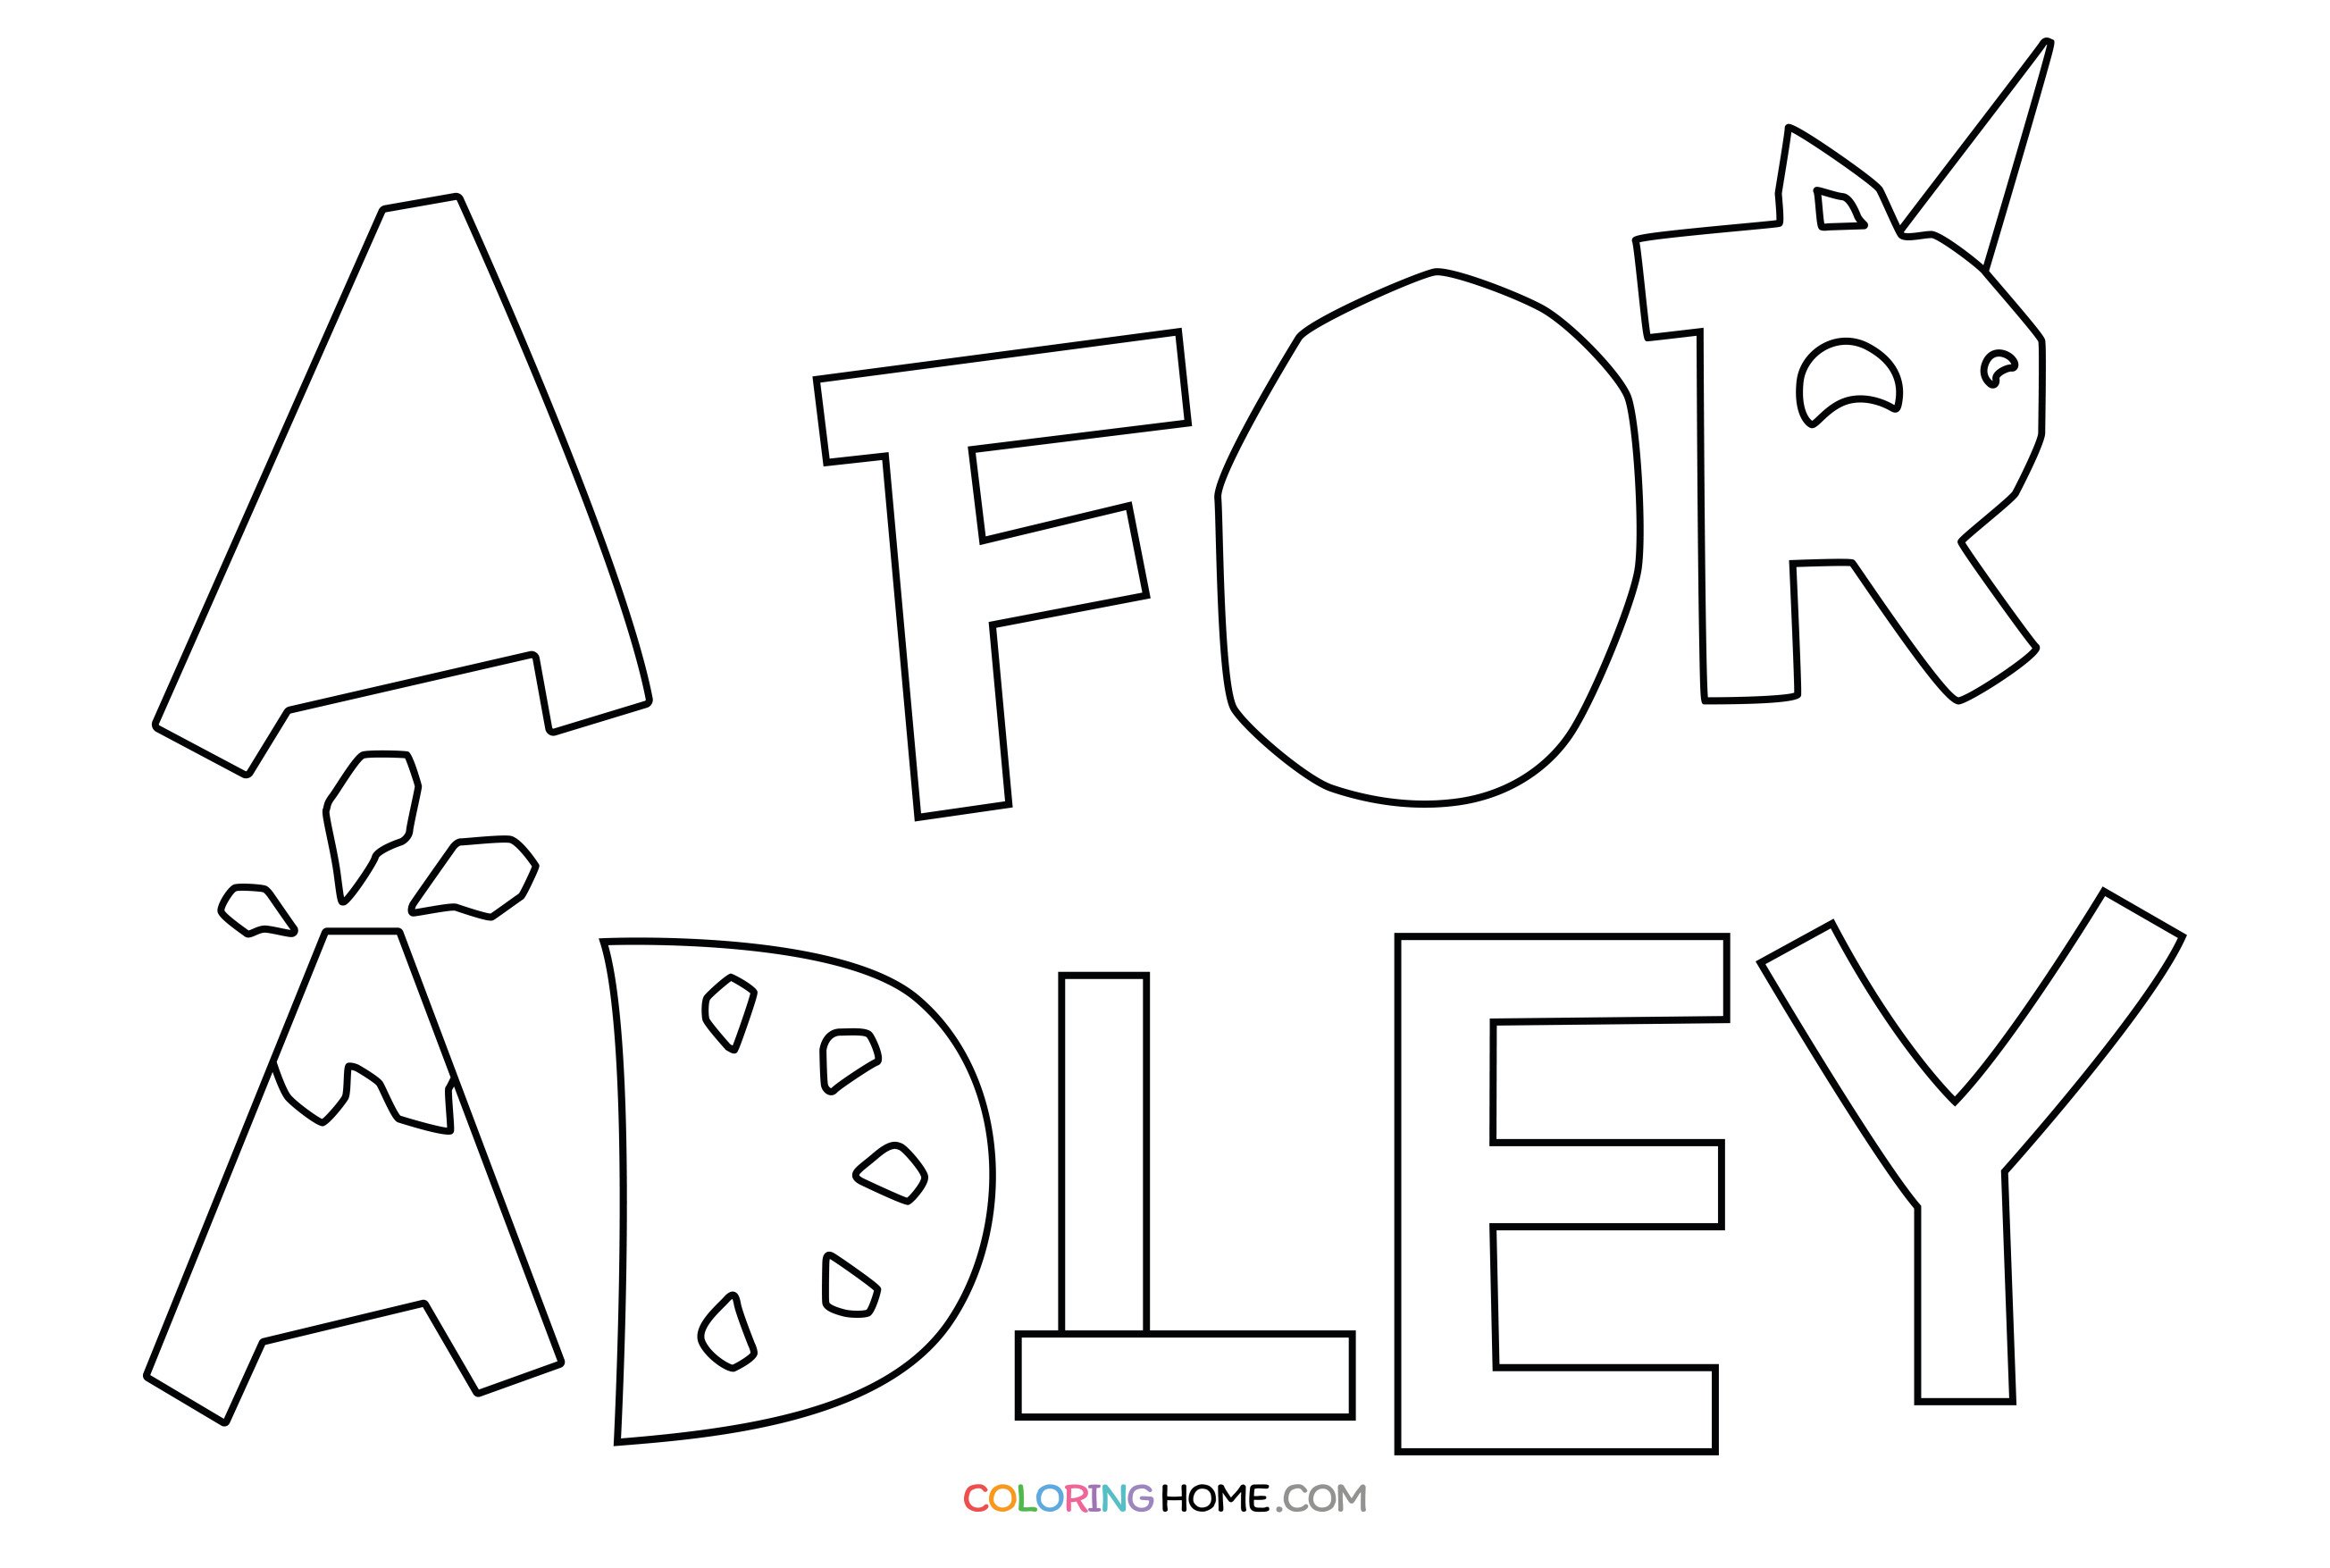 A For Adley Coloring Pages - Coloring Home